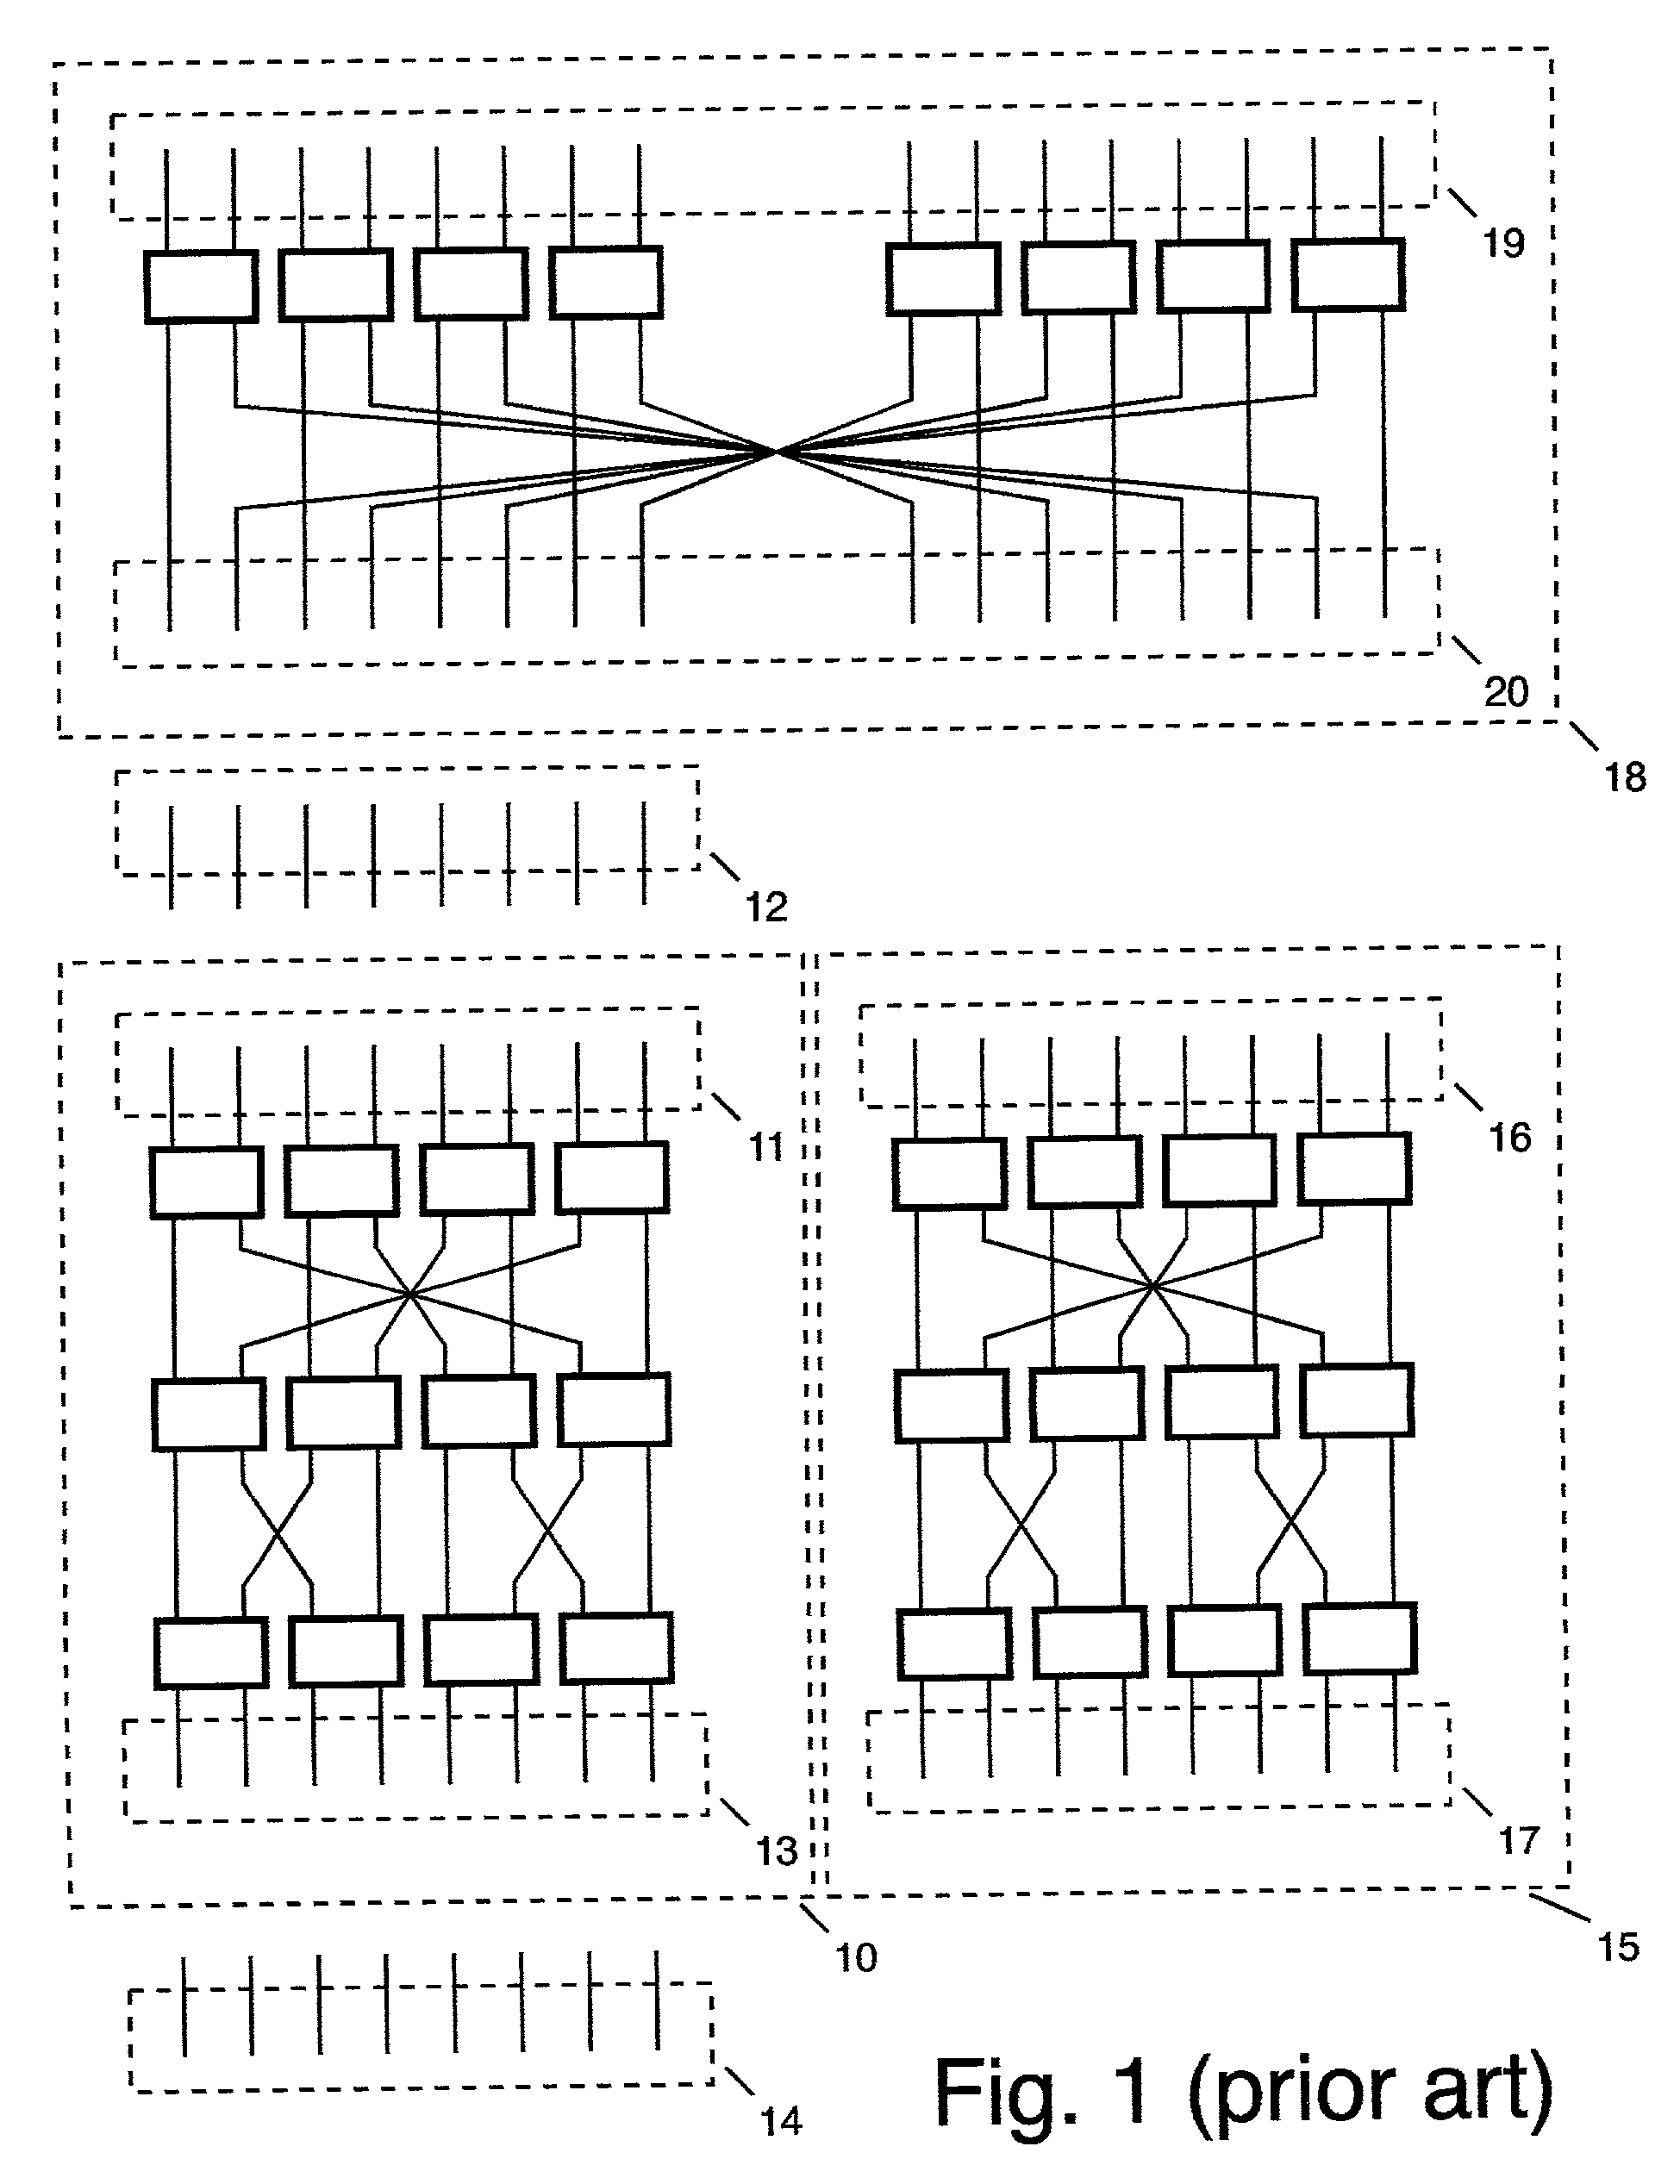 Width upgrade for a scalable switching network